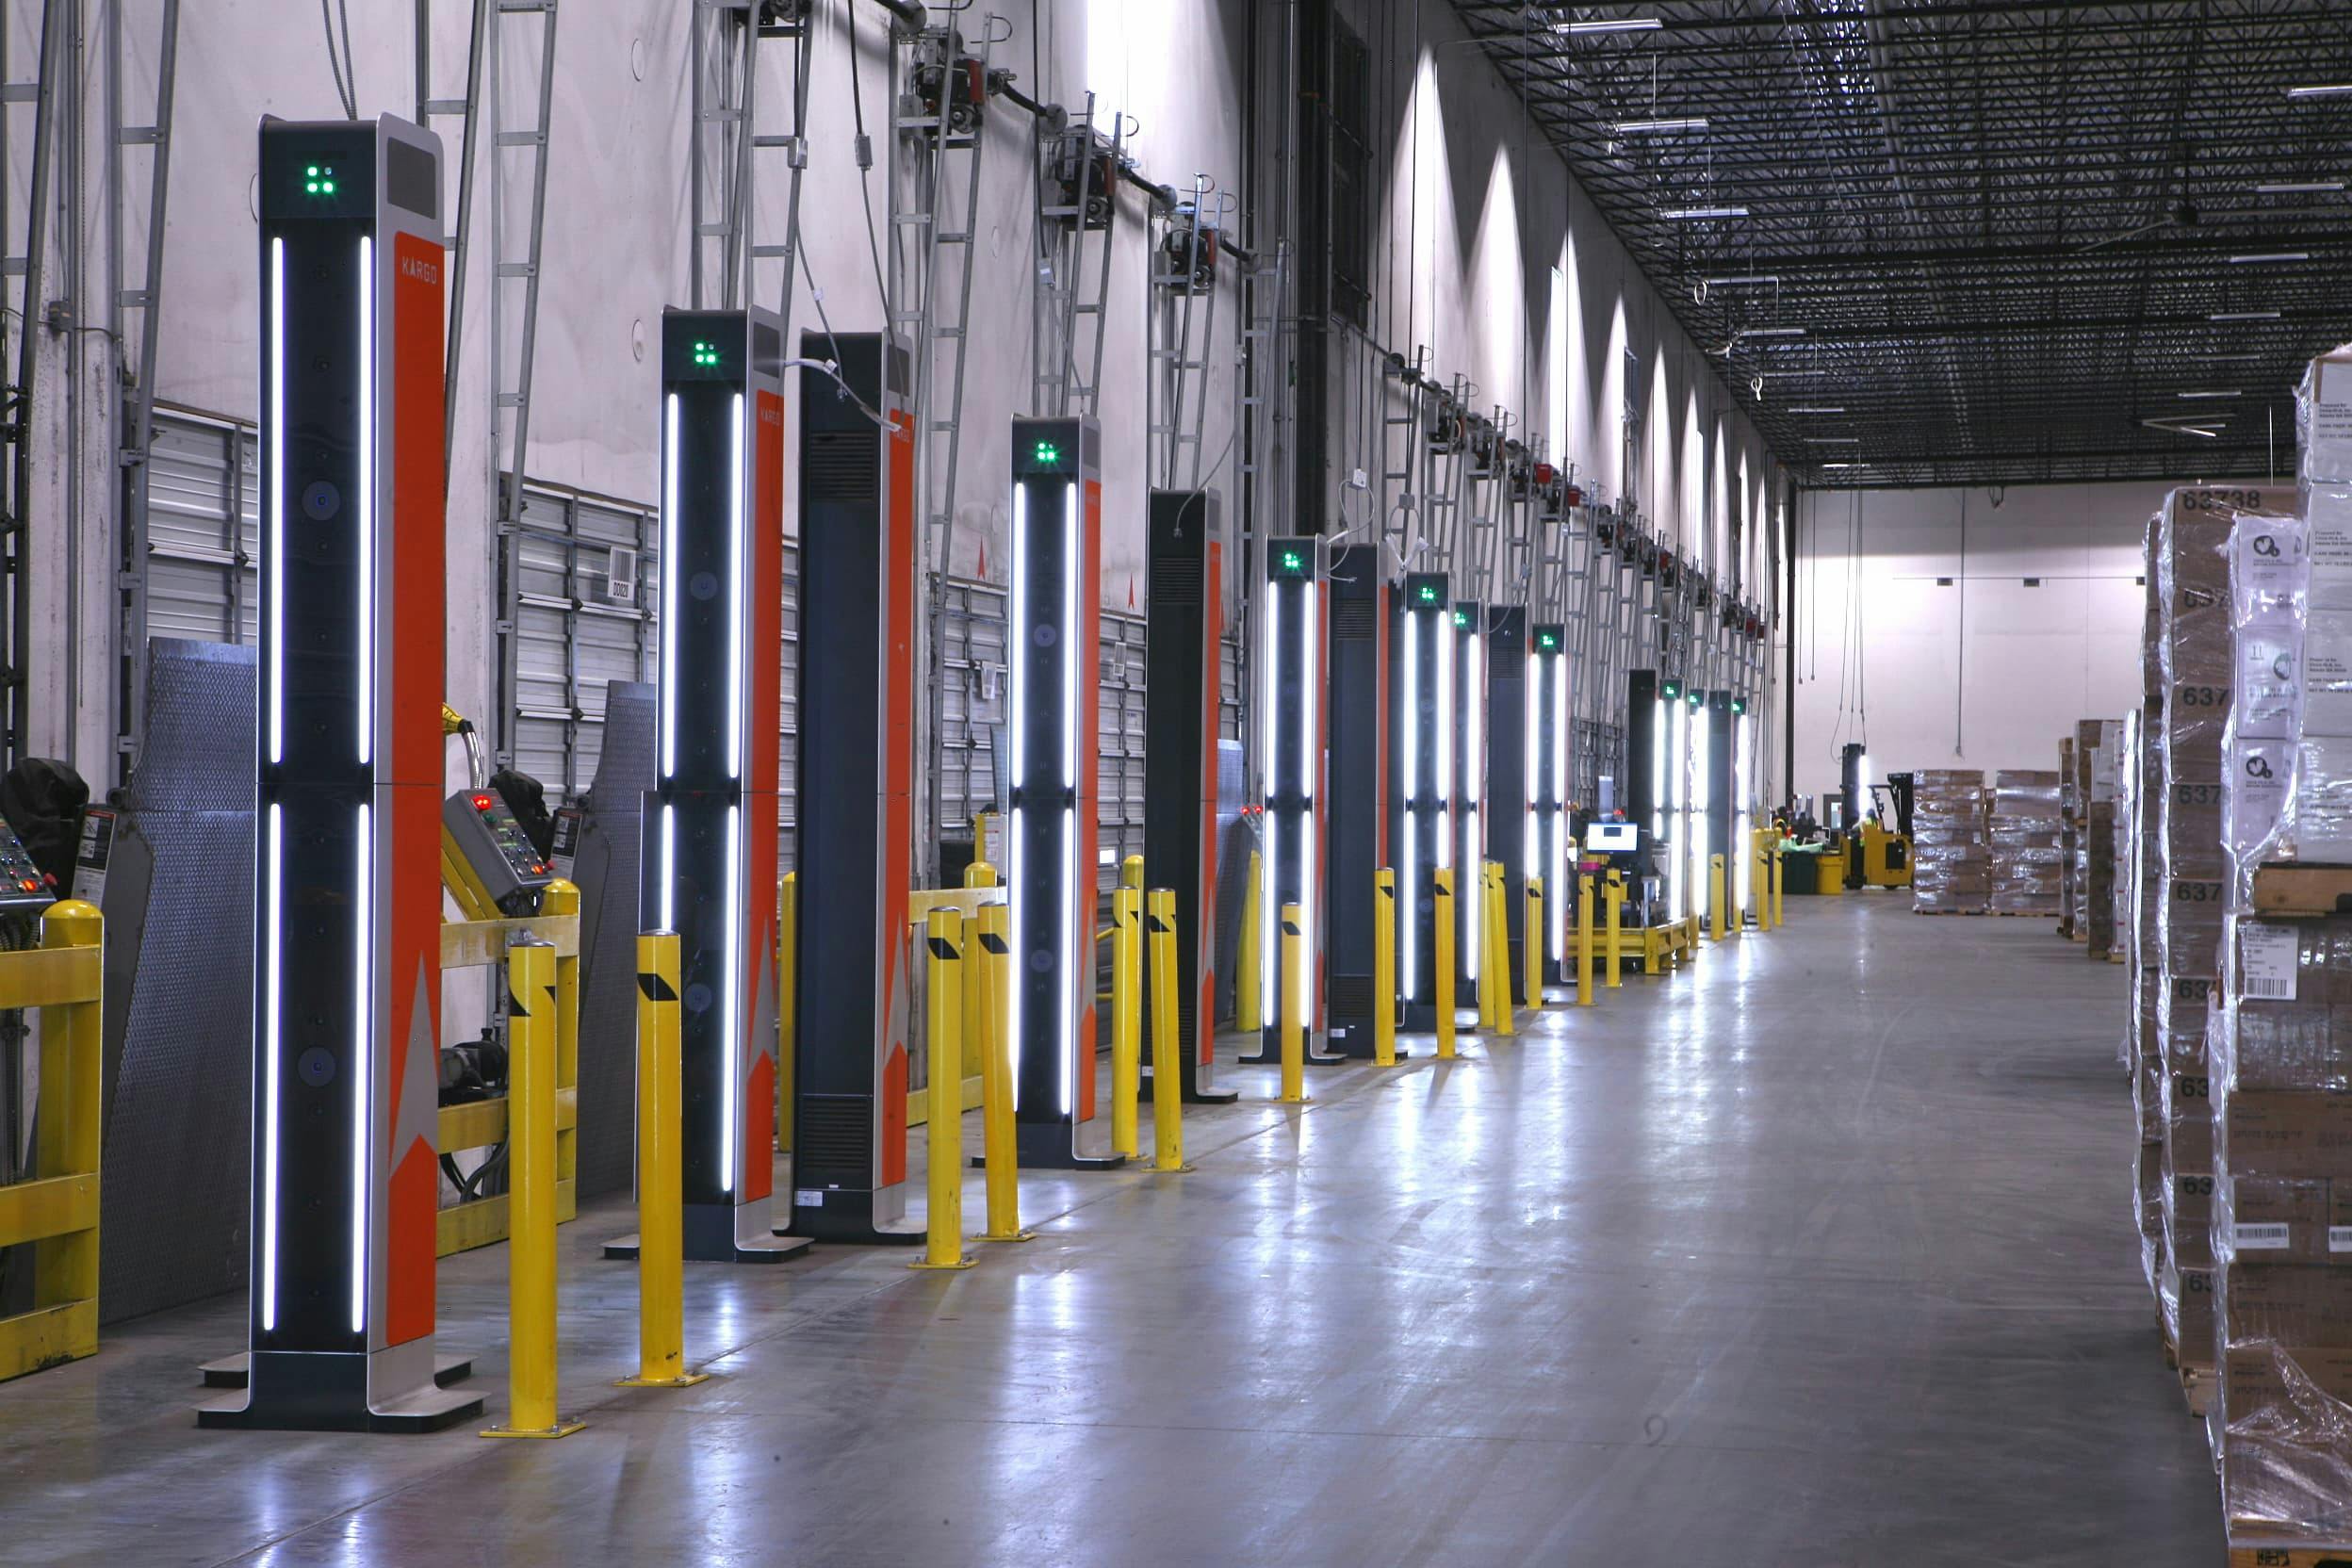 Warehouse loading bays lined with computerized towers on the left and pallets on the right